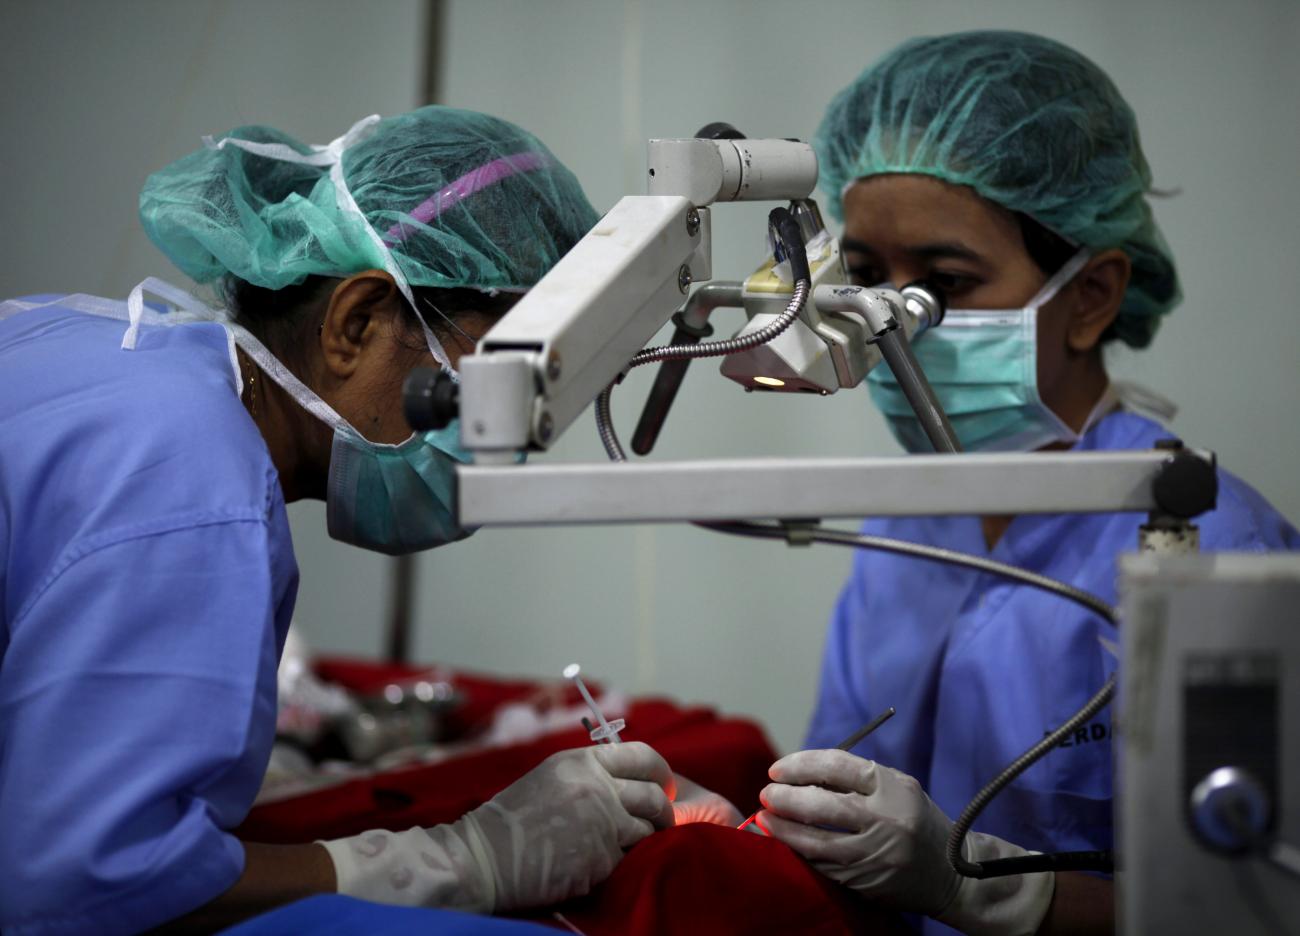 A doctor conducts a cataract operation at Qadr hospital's operation room in Tangerang, Indonesia's Banten province on October 17, 2009.